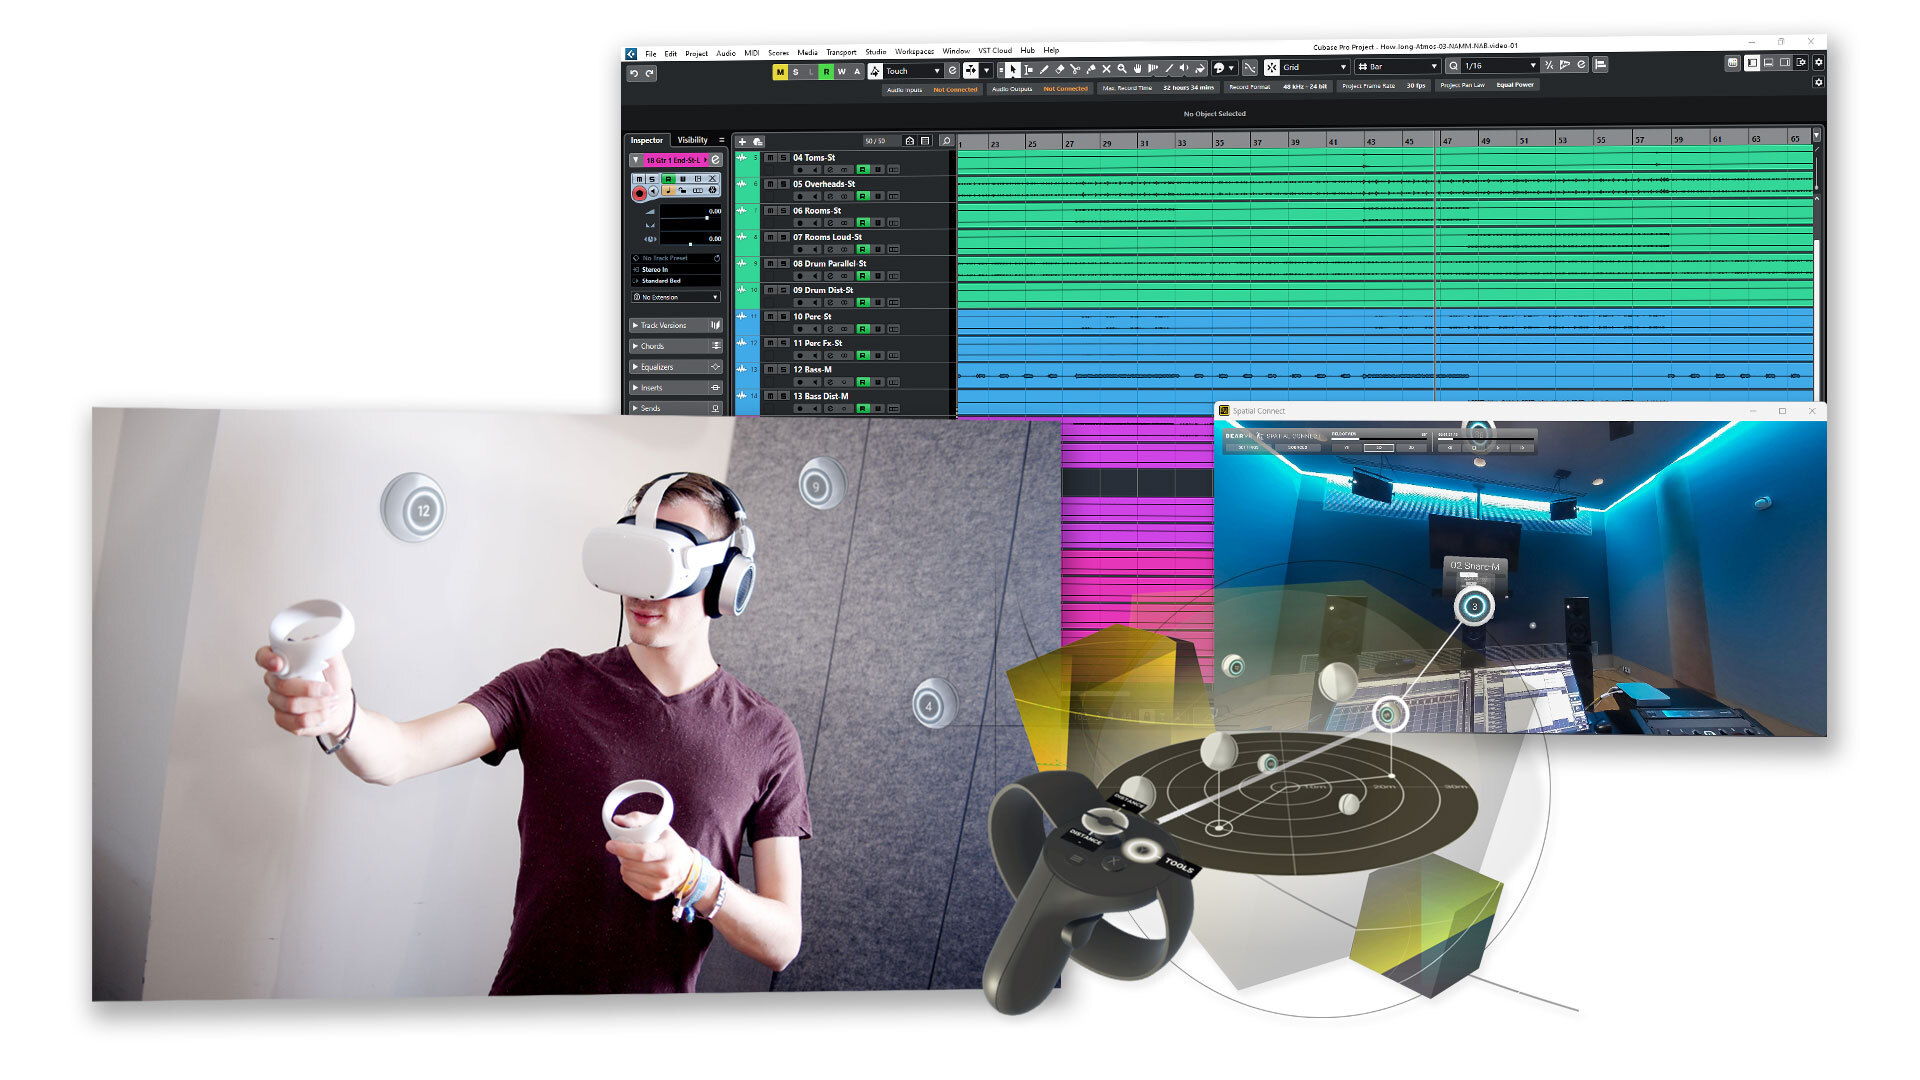 dearVR SPATIAL CONNECT enables total control when mixing spatial audio productions